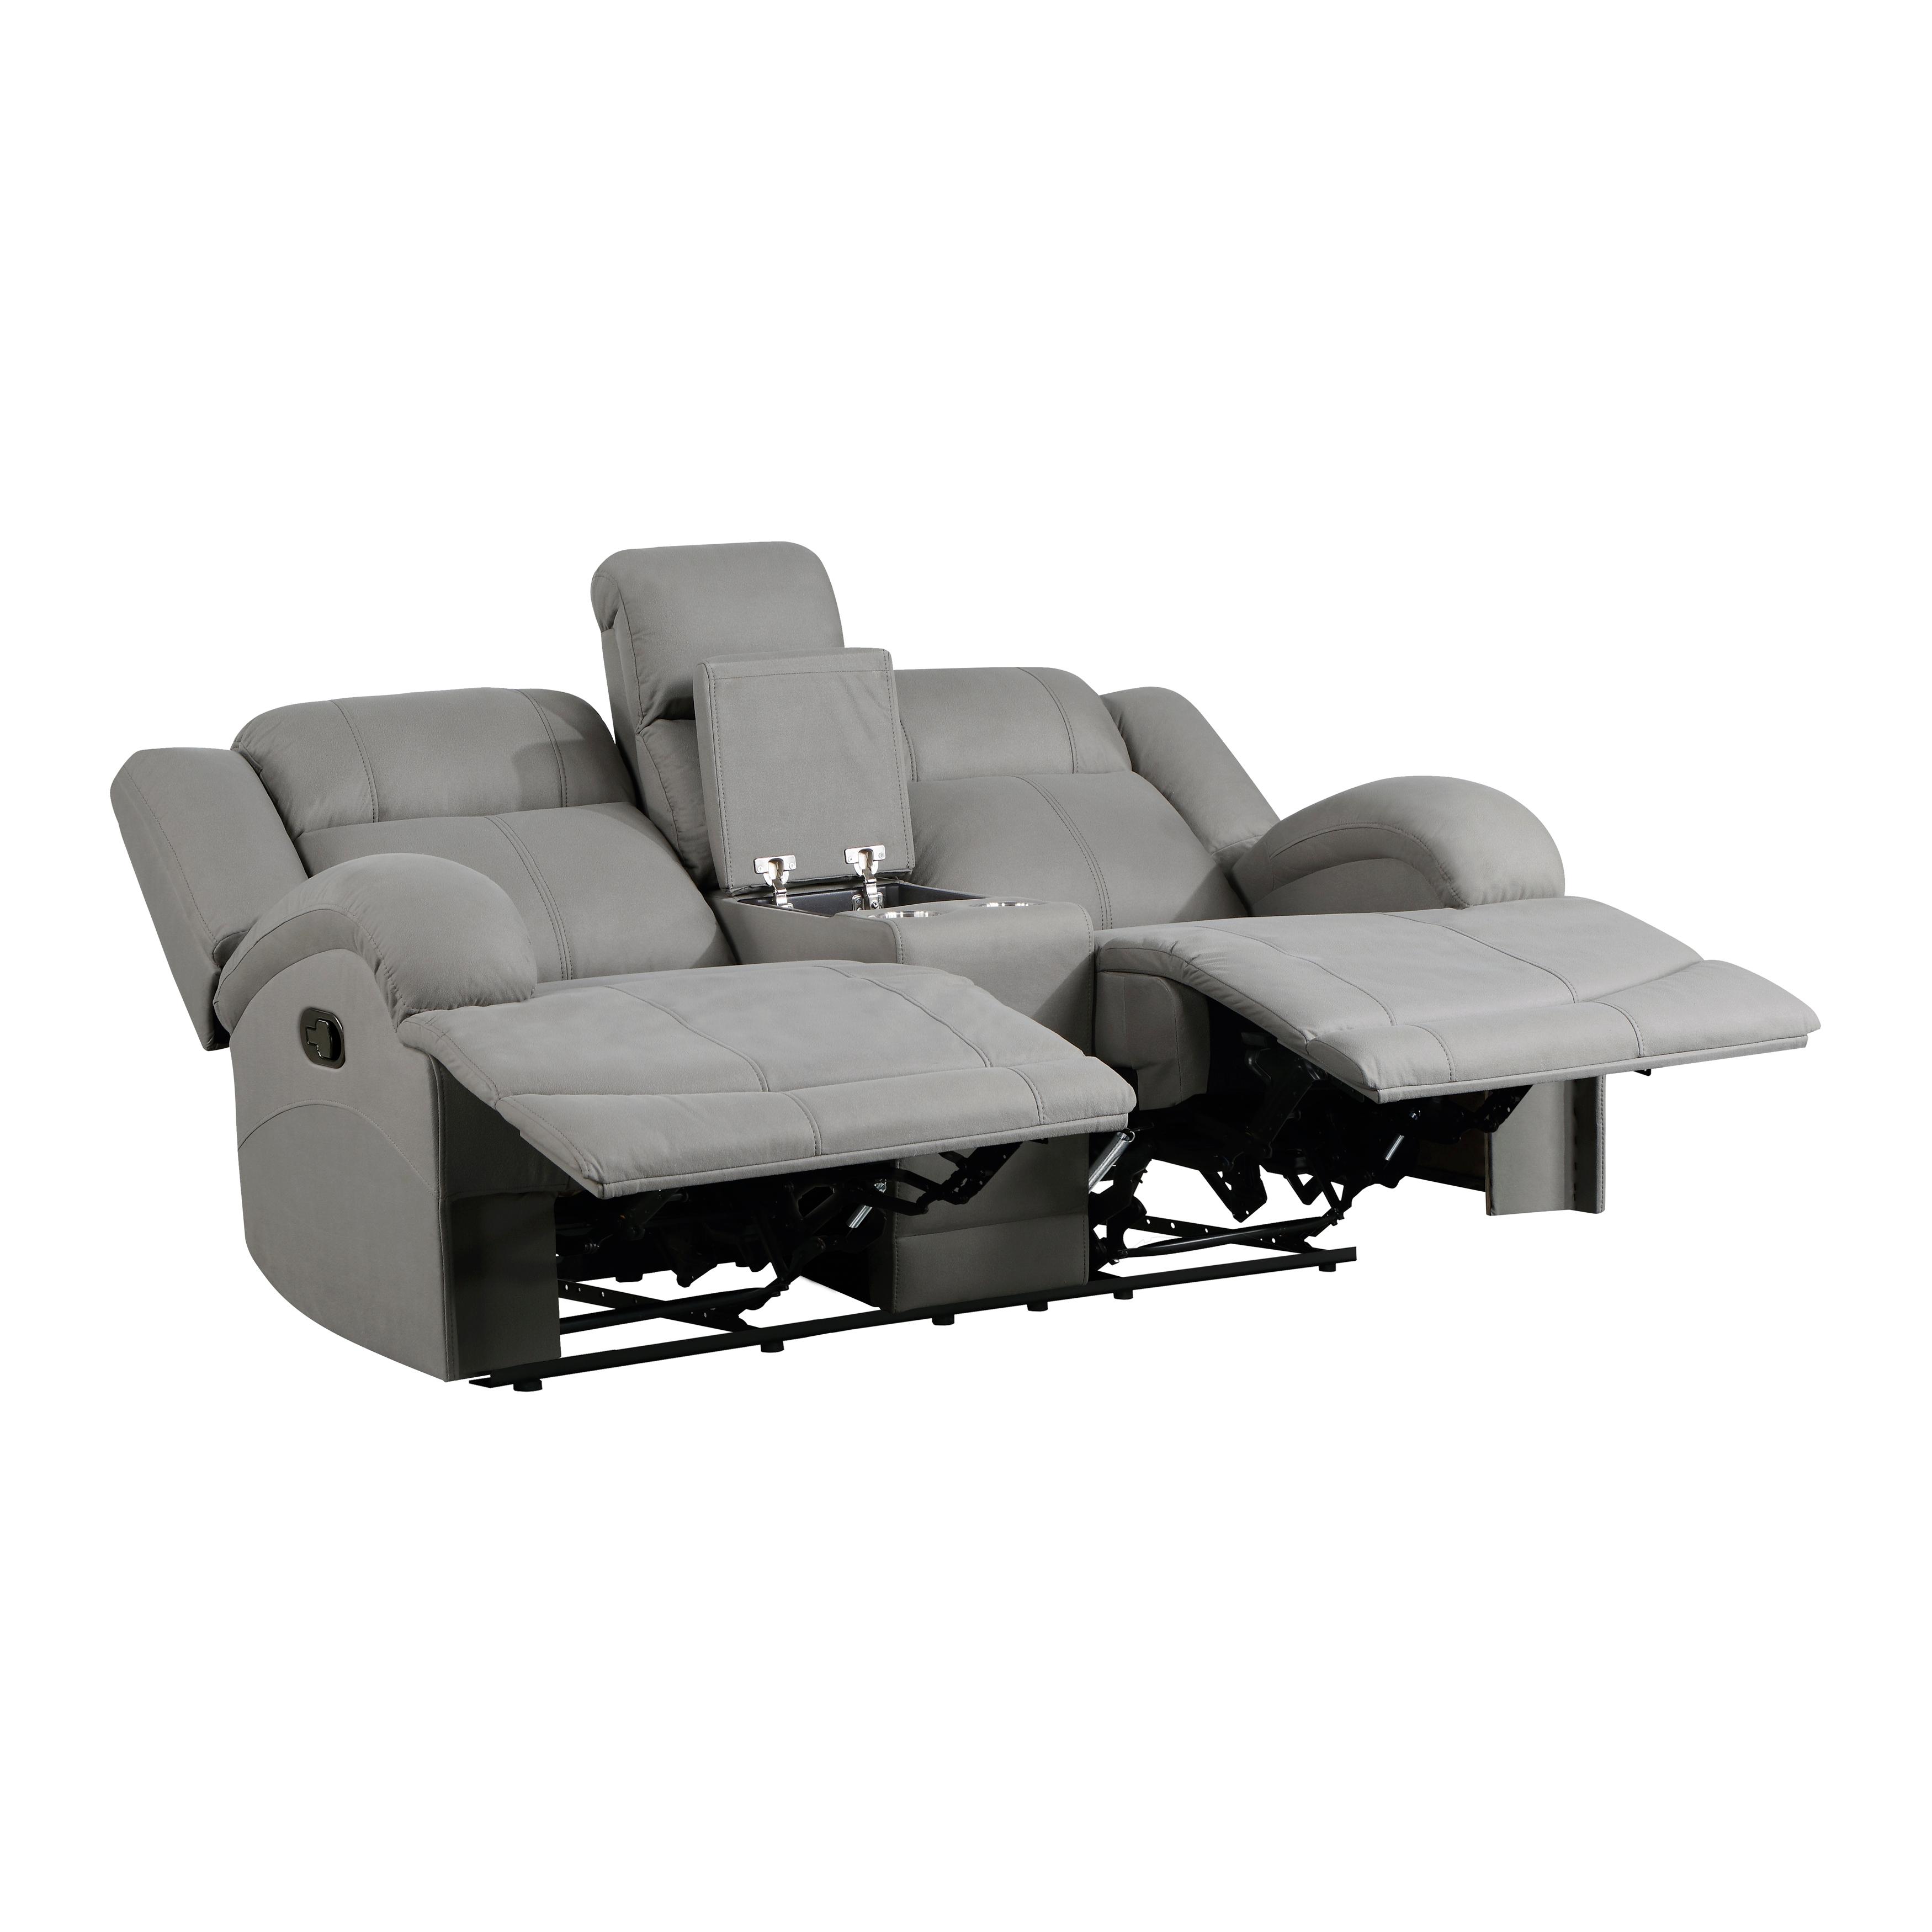 

    
Homelegance 9207GRY-2 Camryn Reclining Loveseat Gray 9207GRY-2
